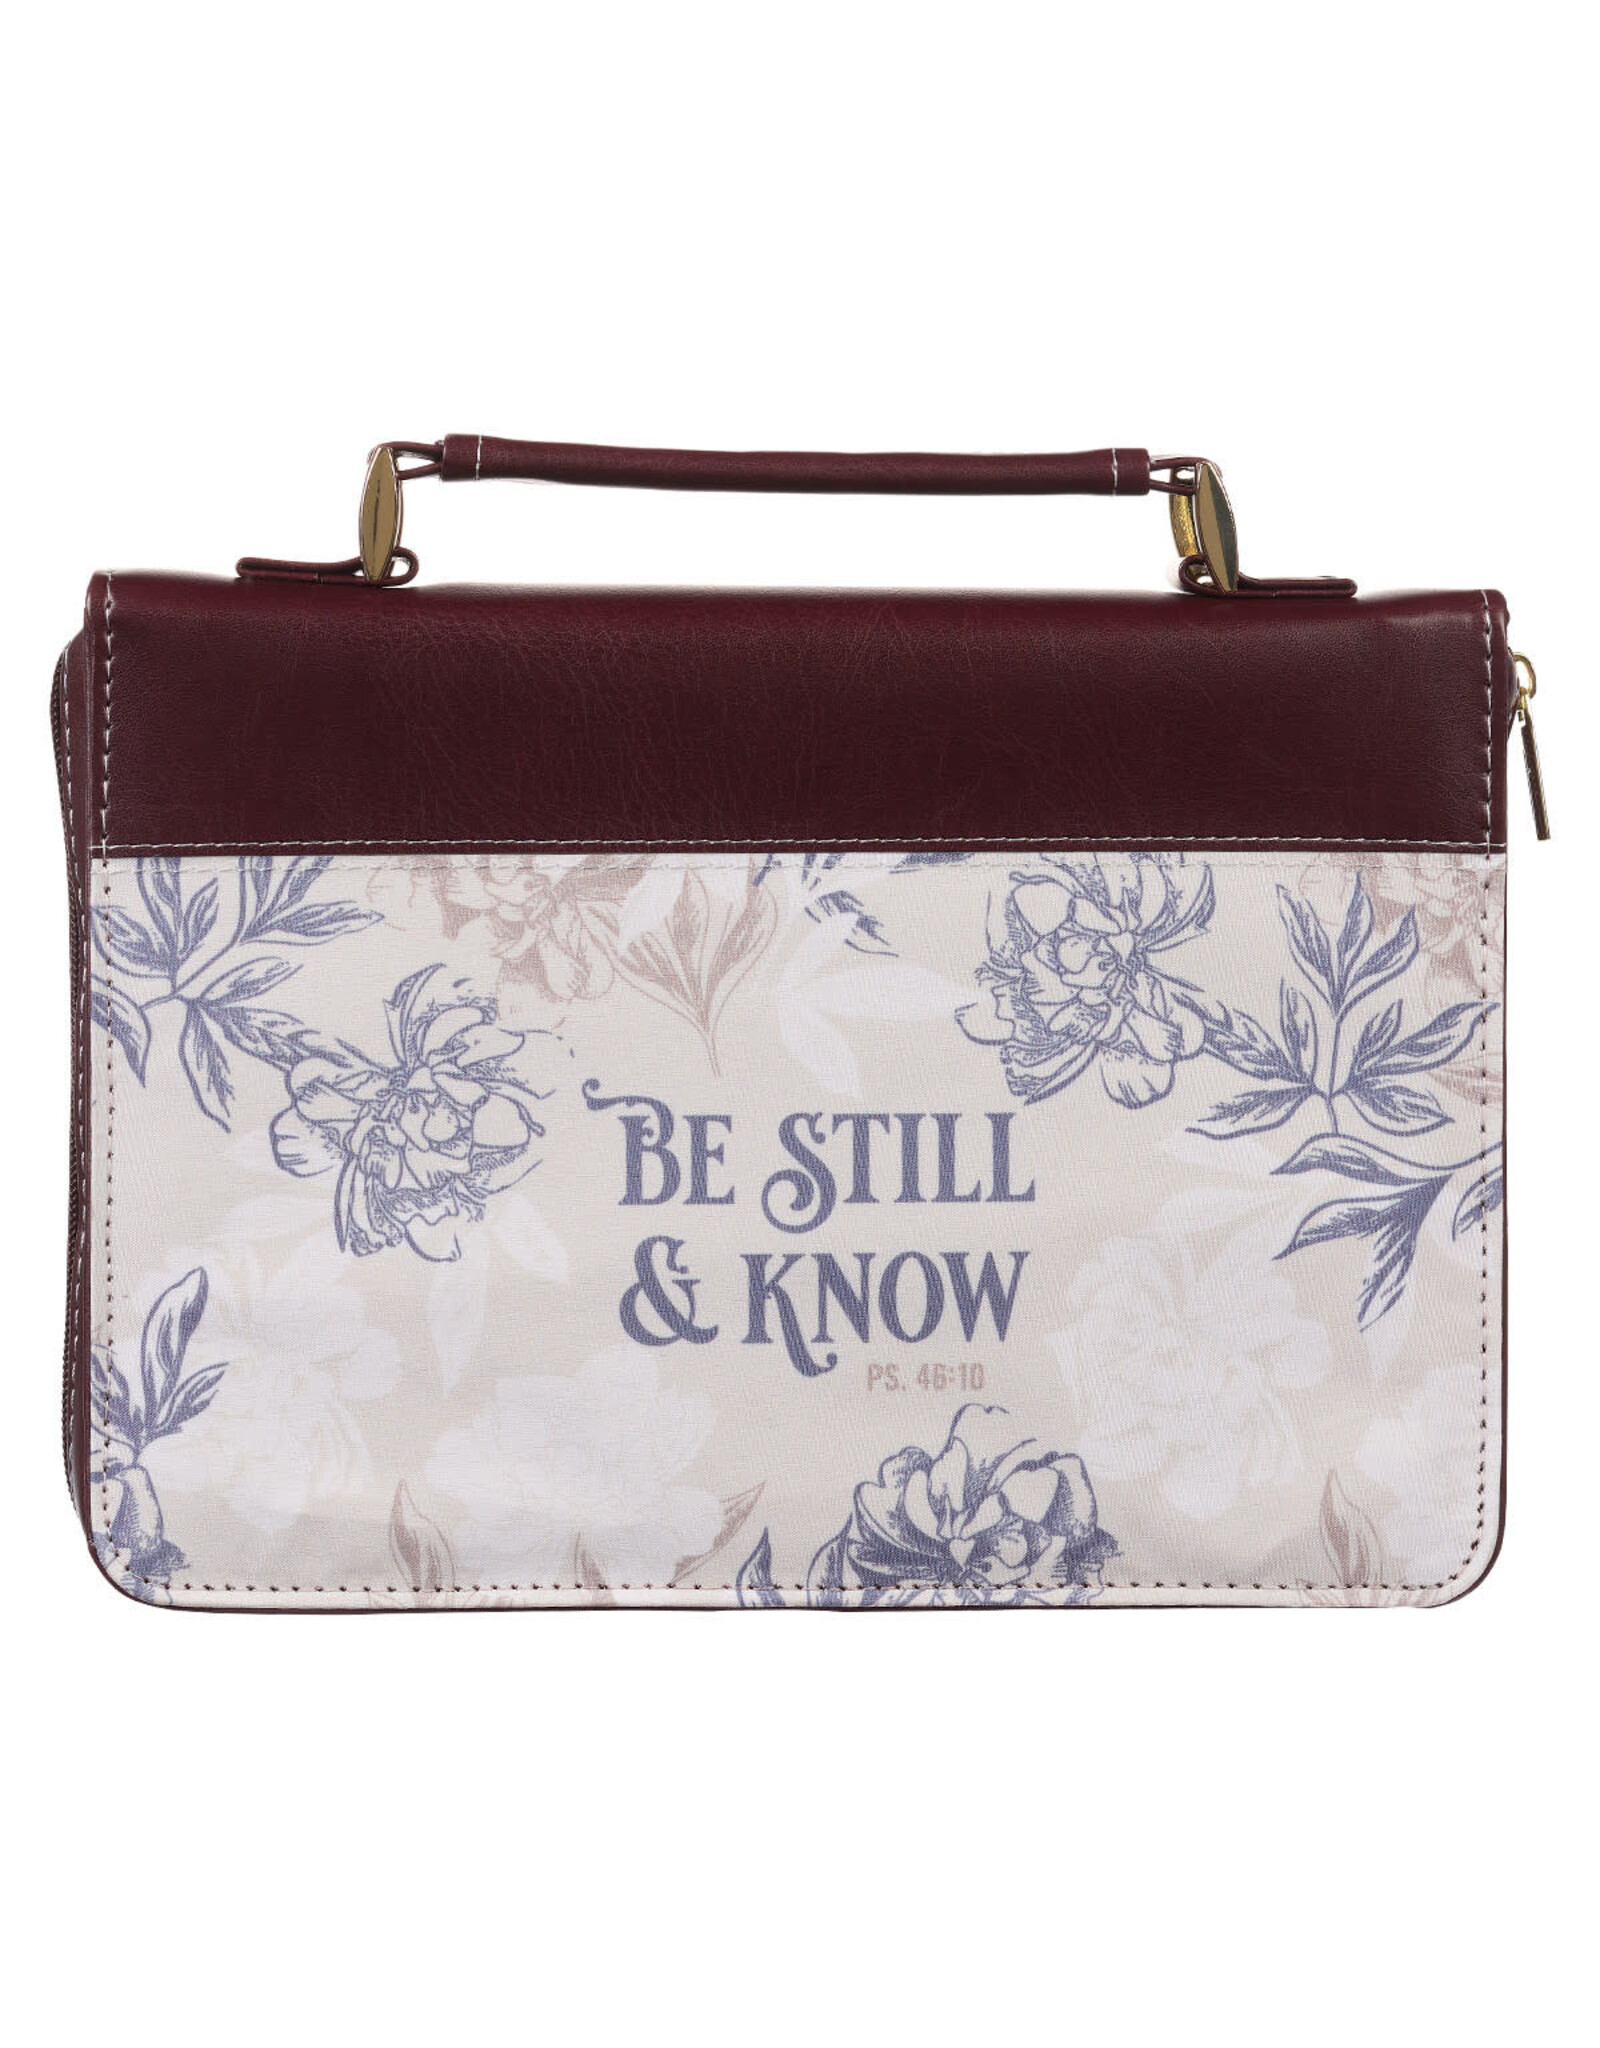 Christian Art Gifts Bible Cover - Be Still & Know, Neutral Florals Faux Leather (Psalm 46:10),